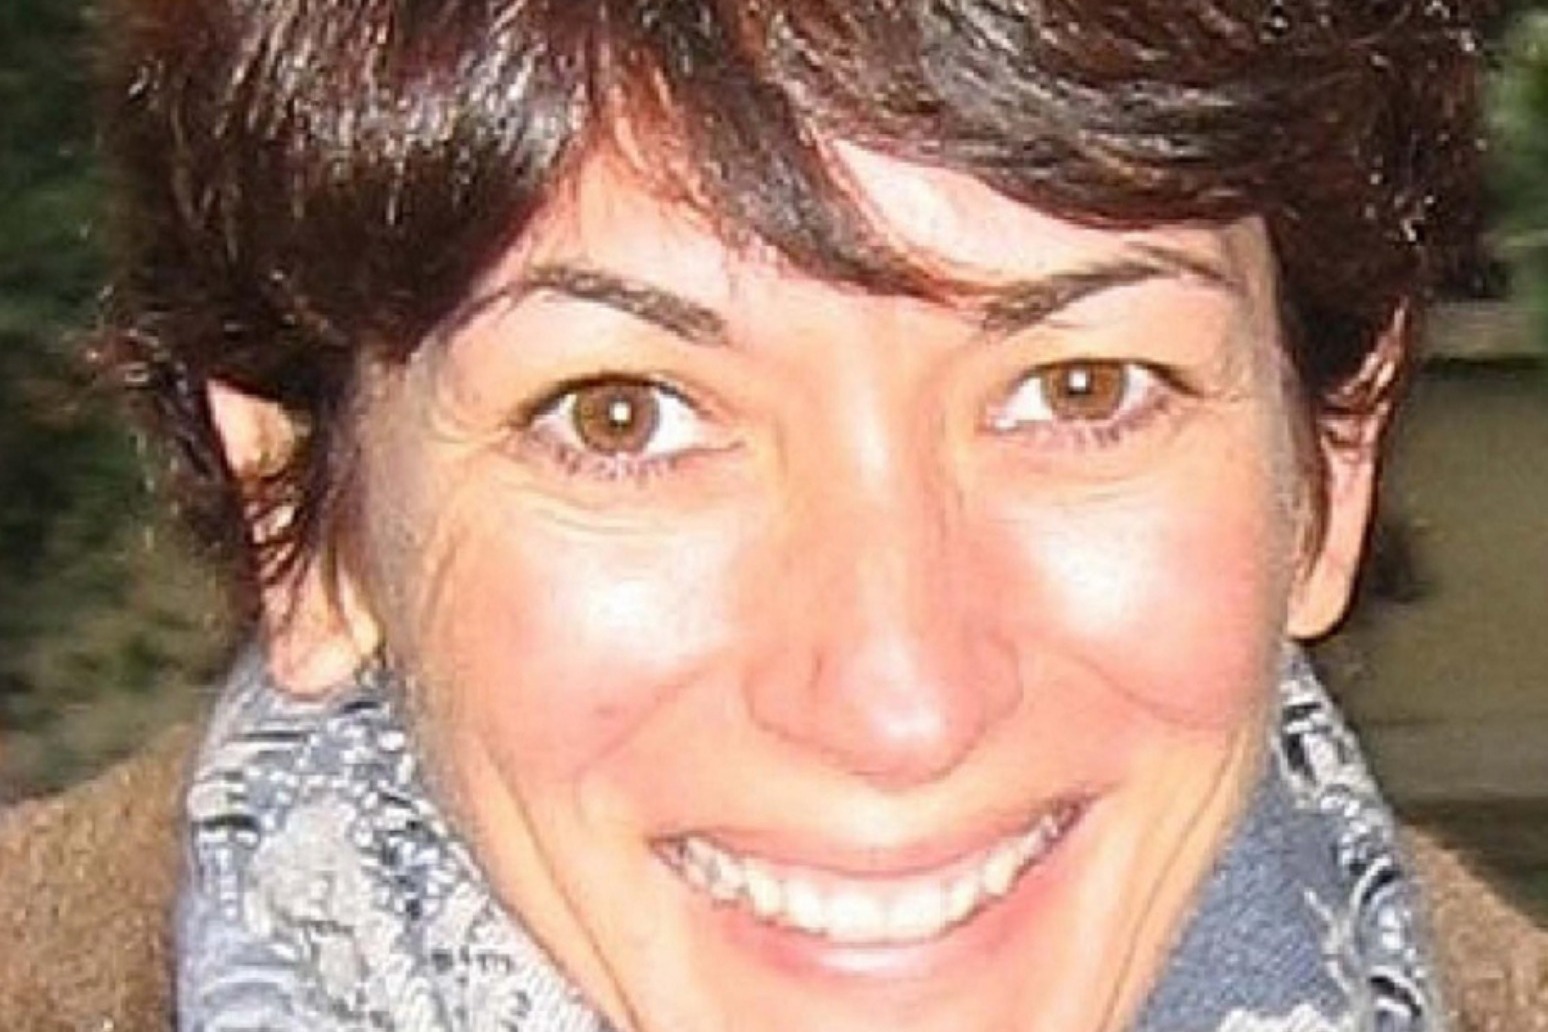 Ghislaine Maxwell’s recommended prison sentence too harsh, lawyers say 